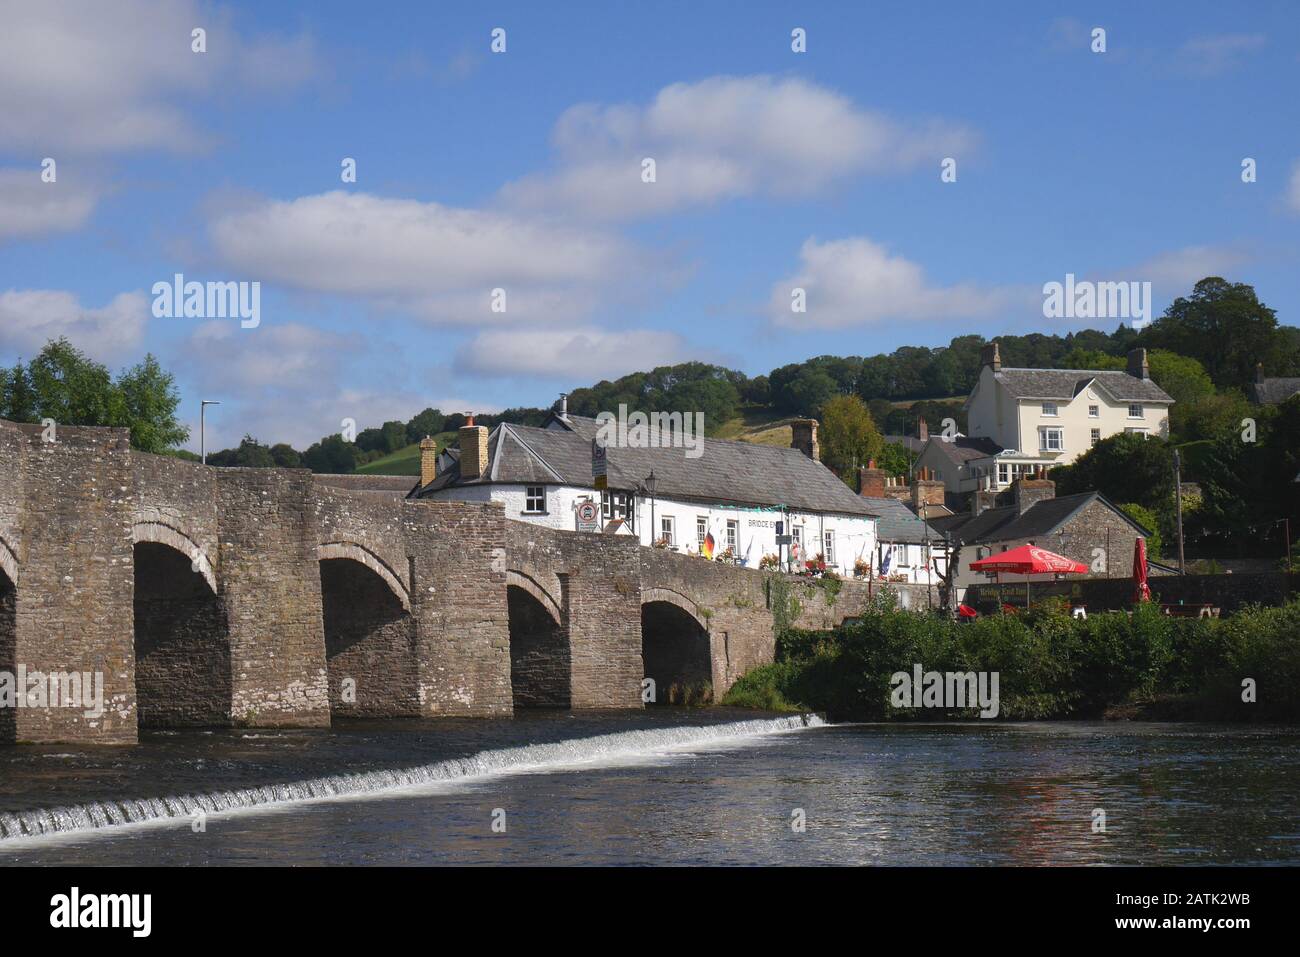 The grade one listed 18th century bridge, standing above a weir, across the River Usk, Crickhowell, Powys, Wales, United Kingdom Stock Photo